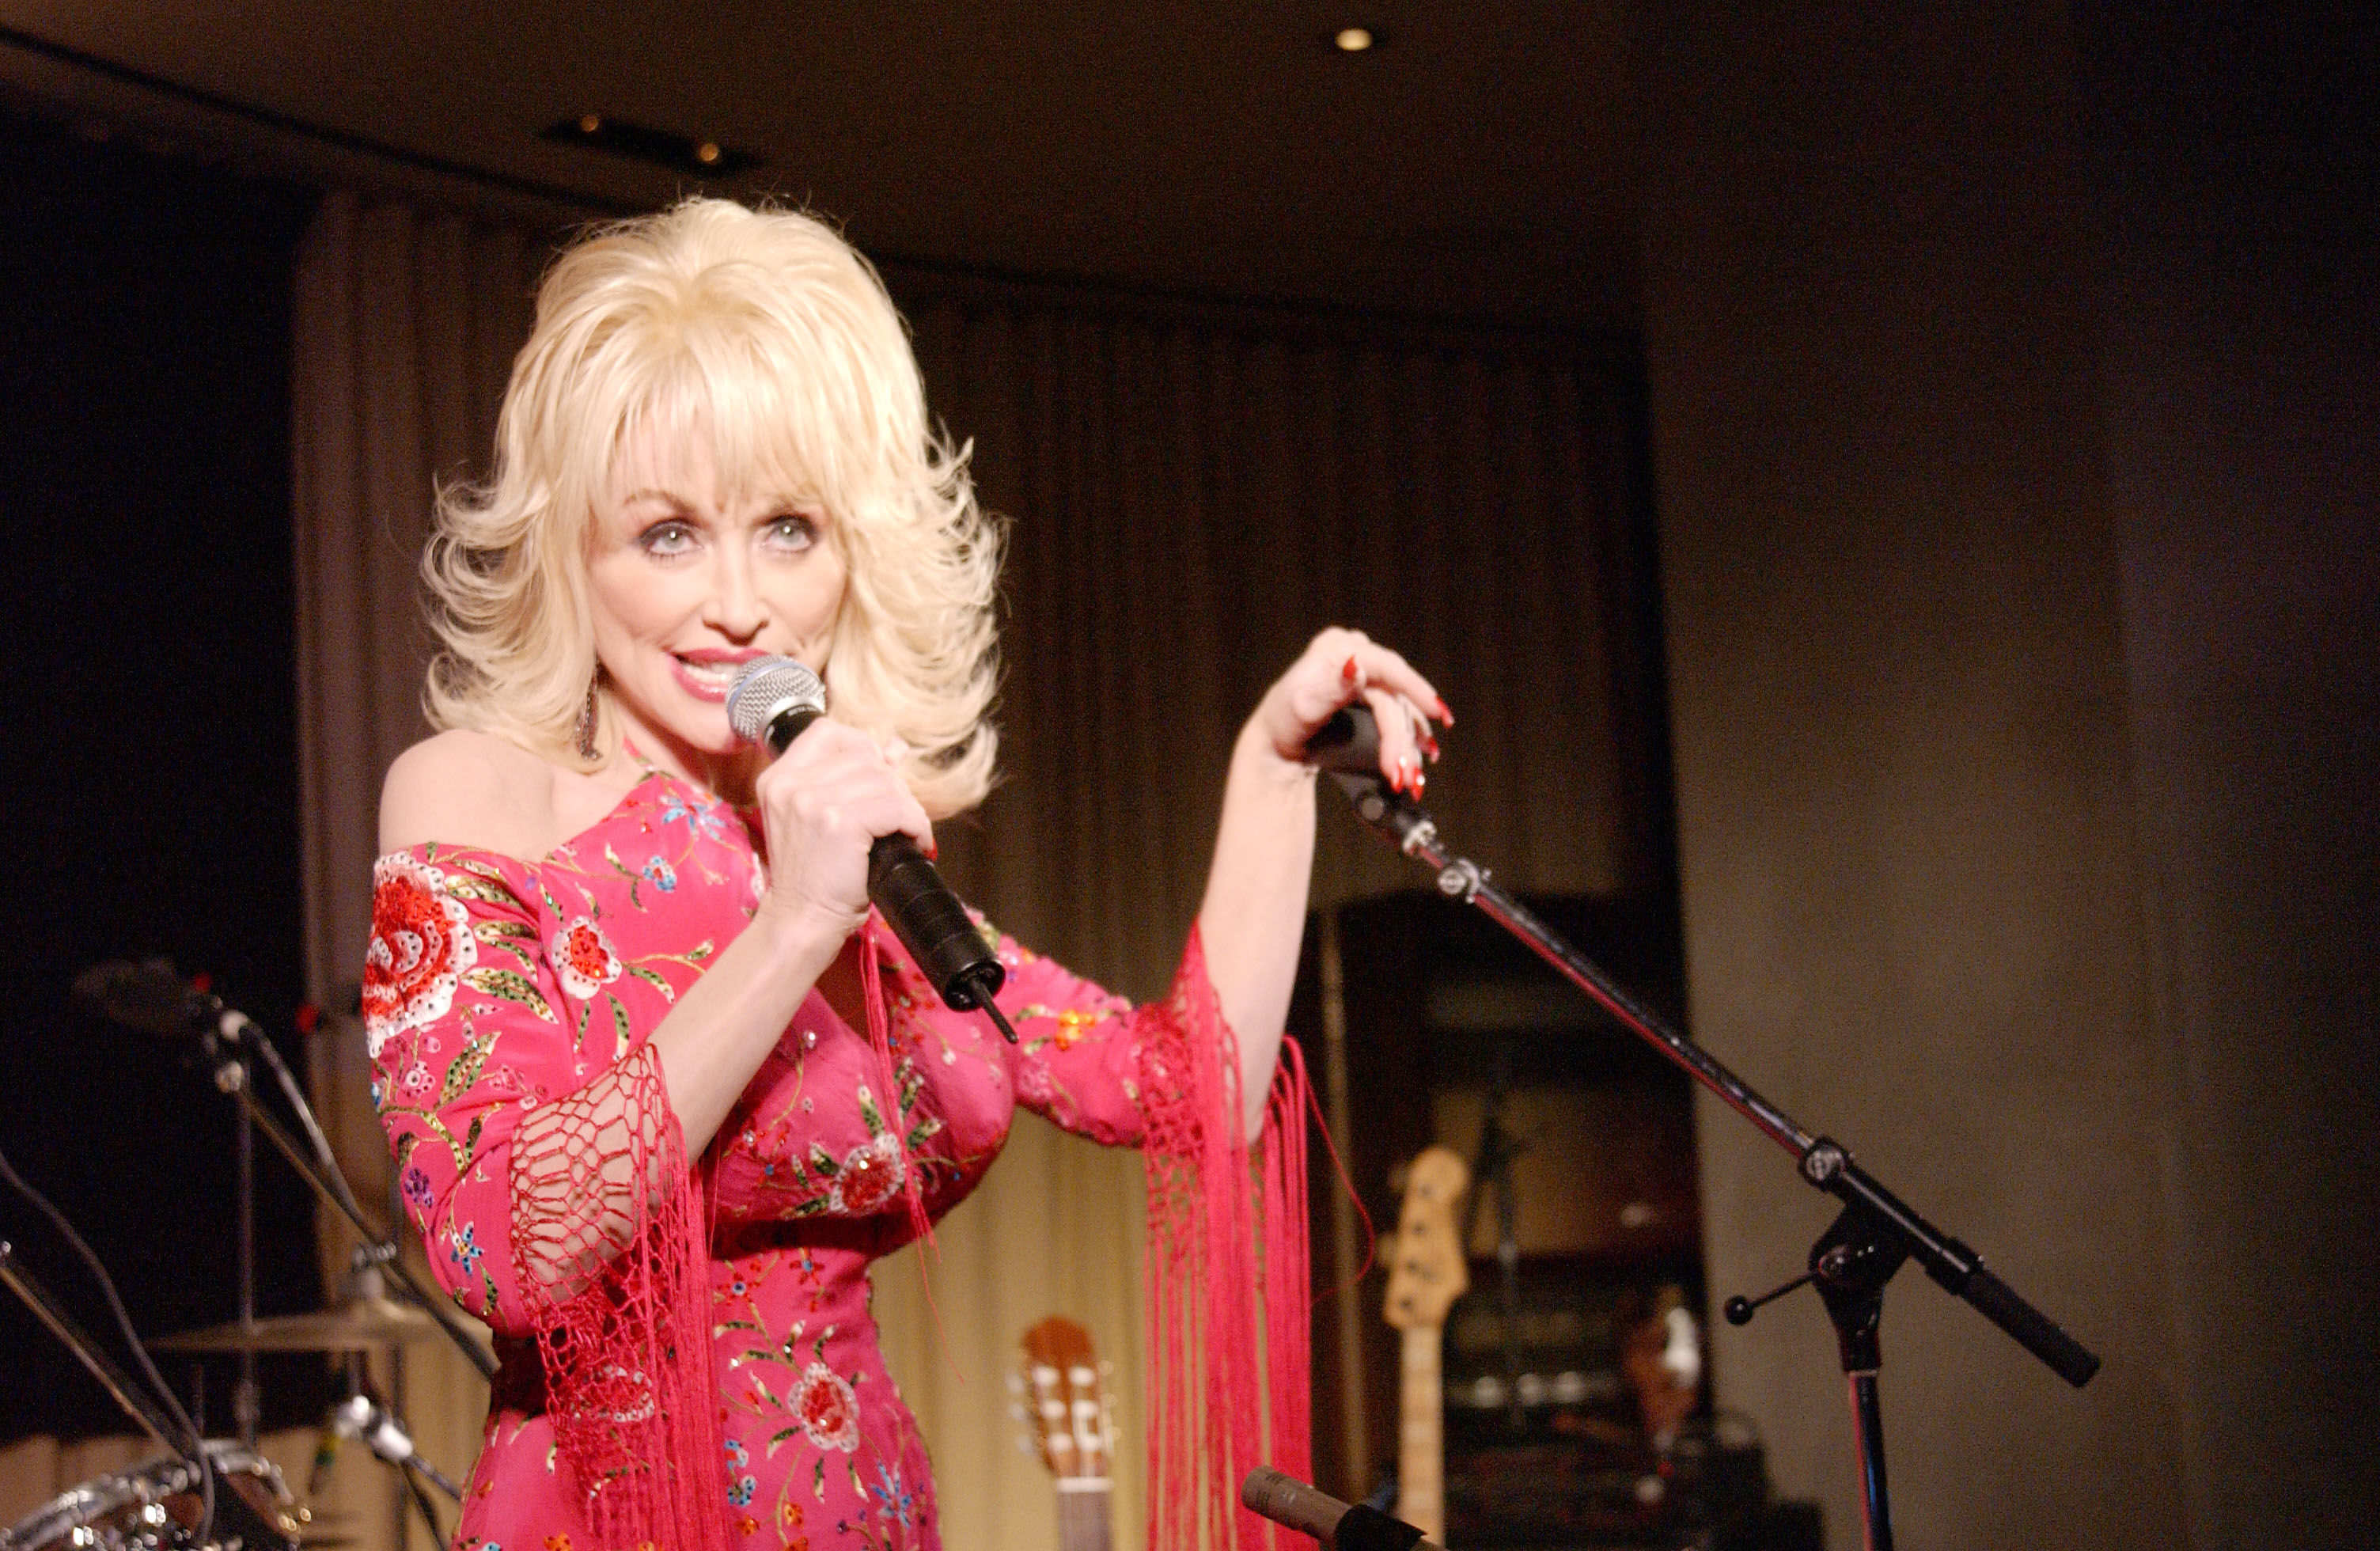 Dolly Parton performing on stage. She's in a red dress and singing into a microphone, smiling.